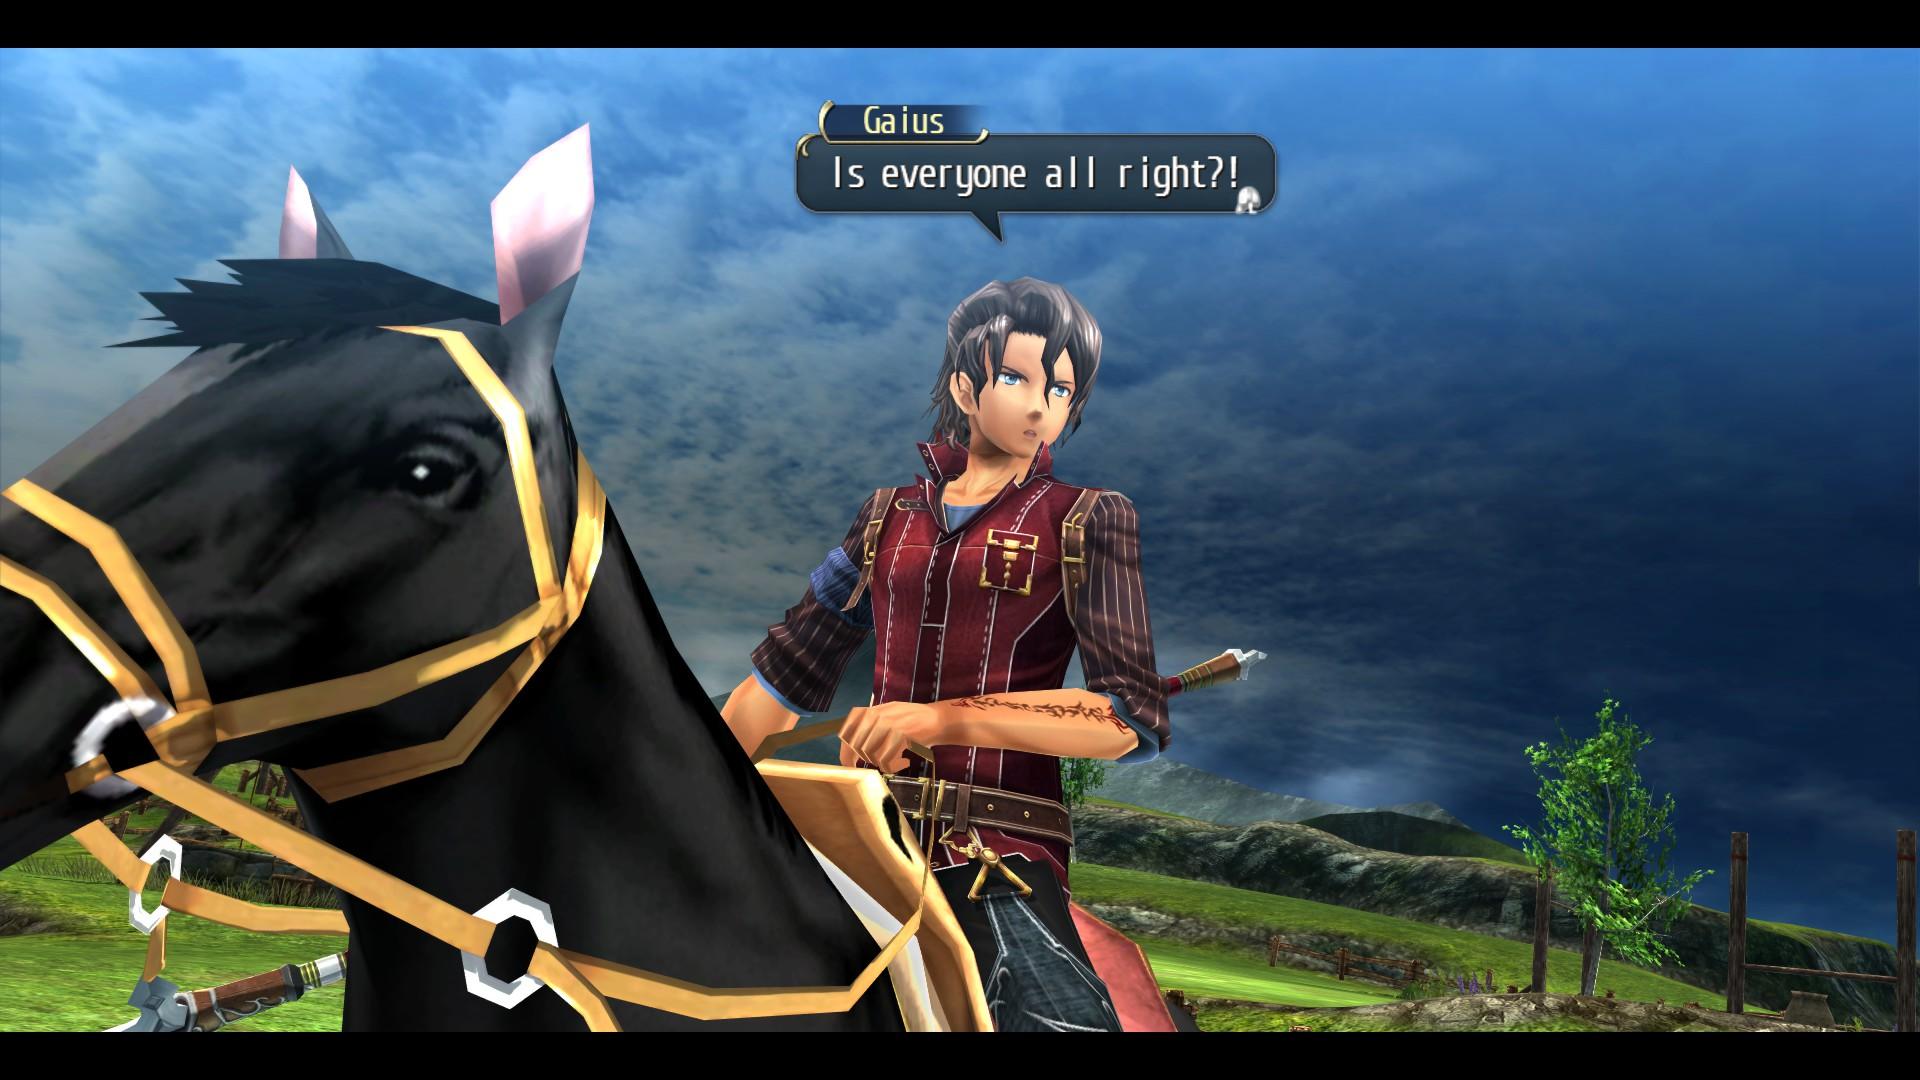 Screenshot №2 from game The Legend of Heroes: Trails of Cold Steel II